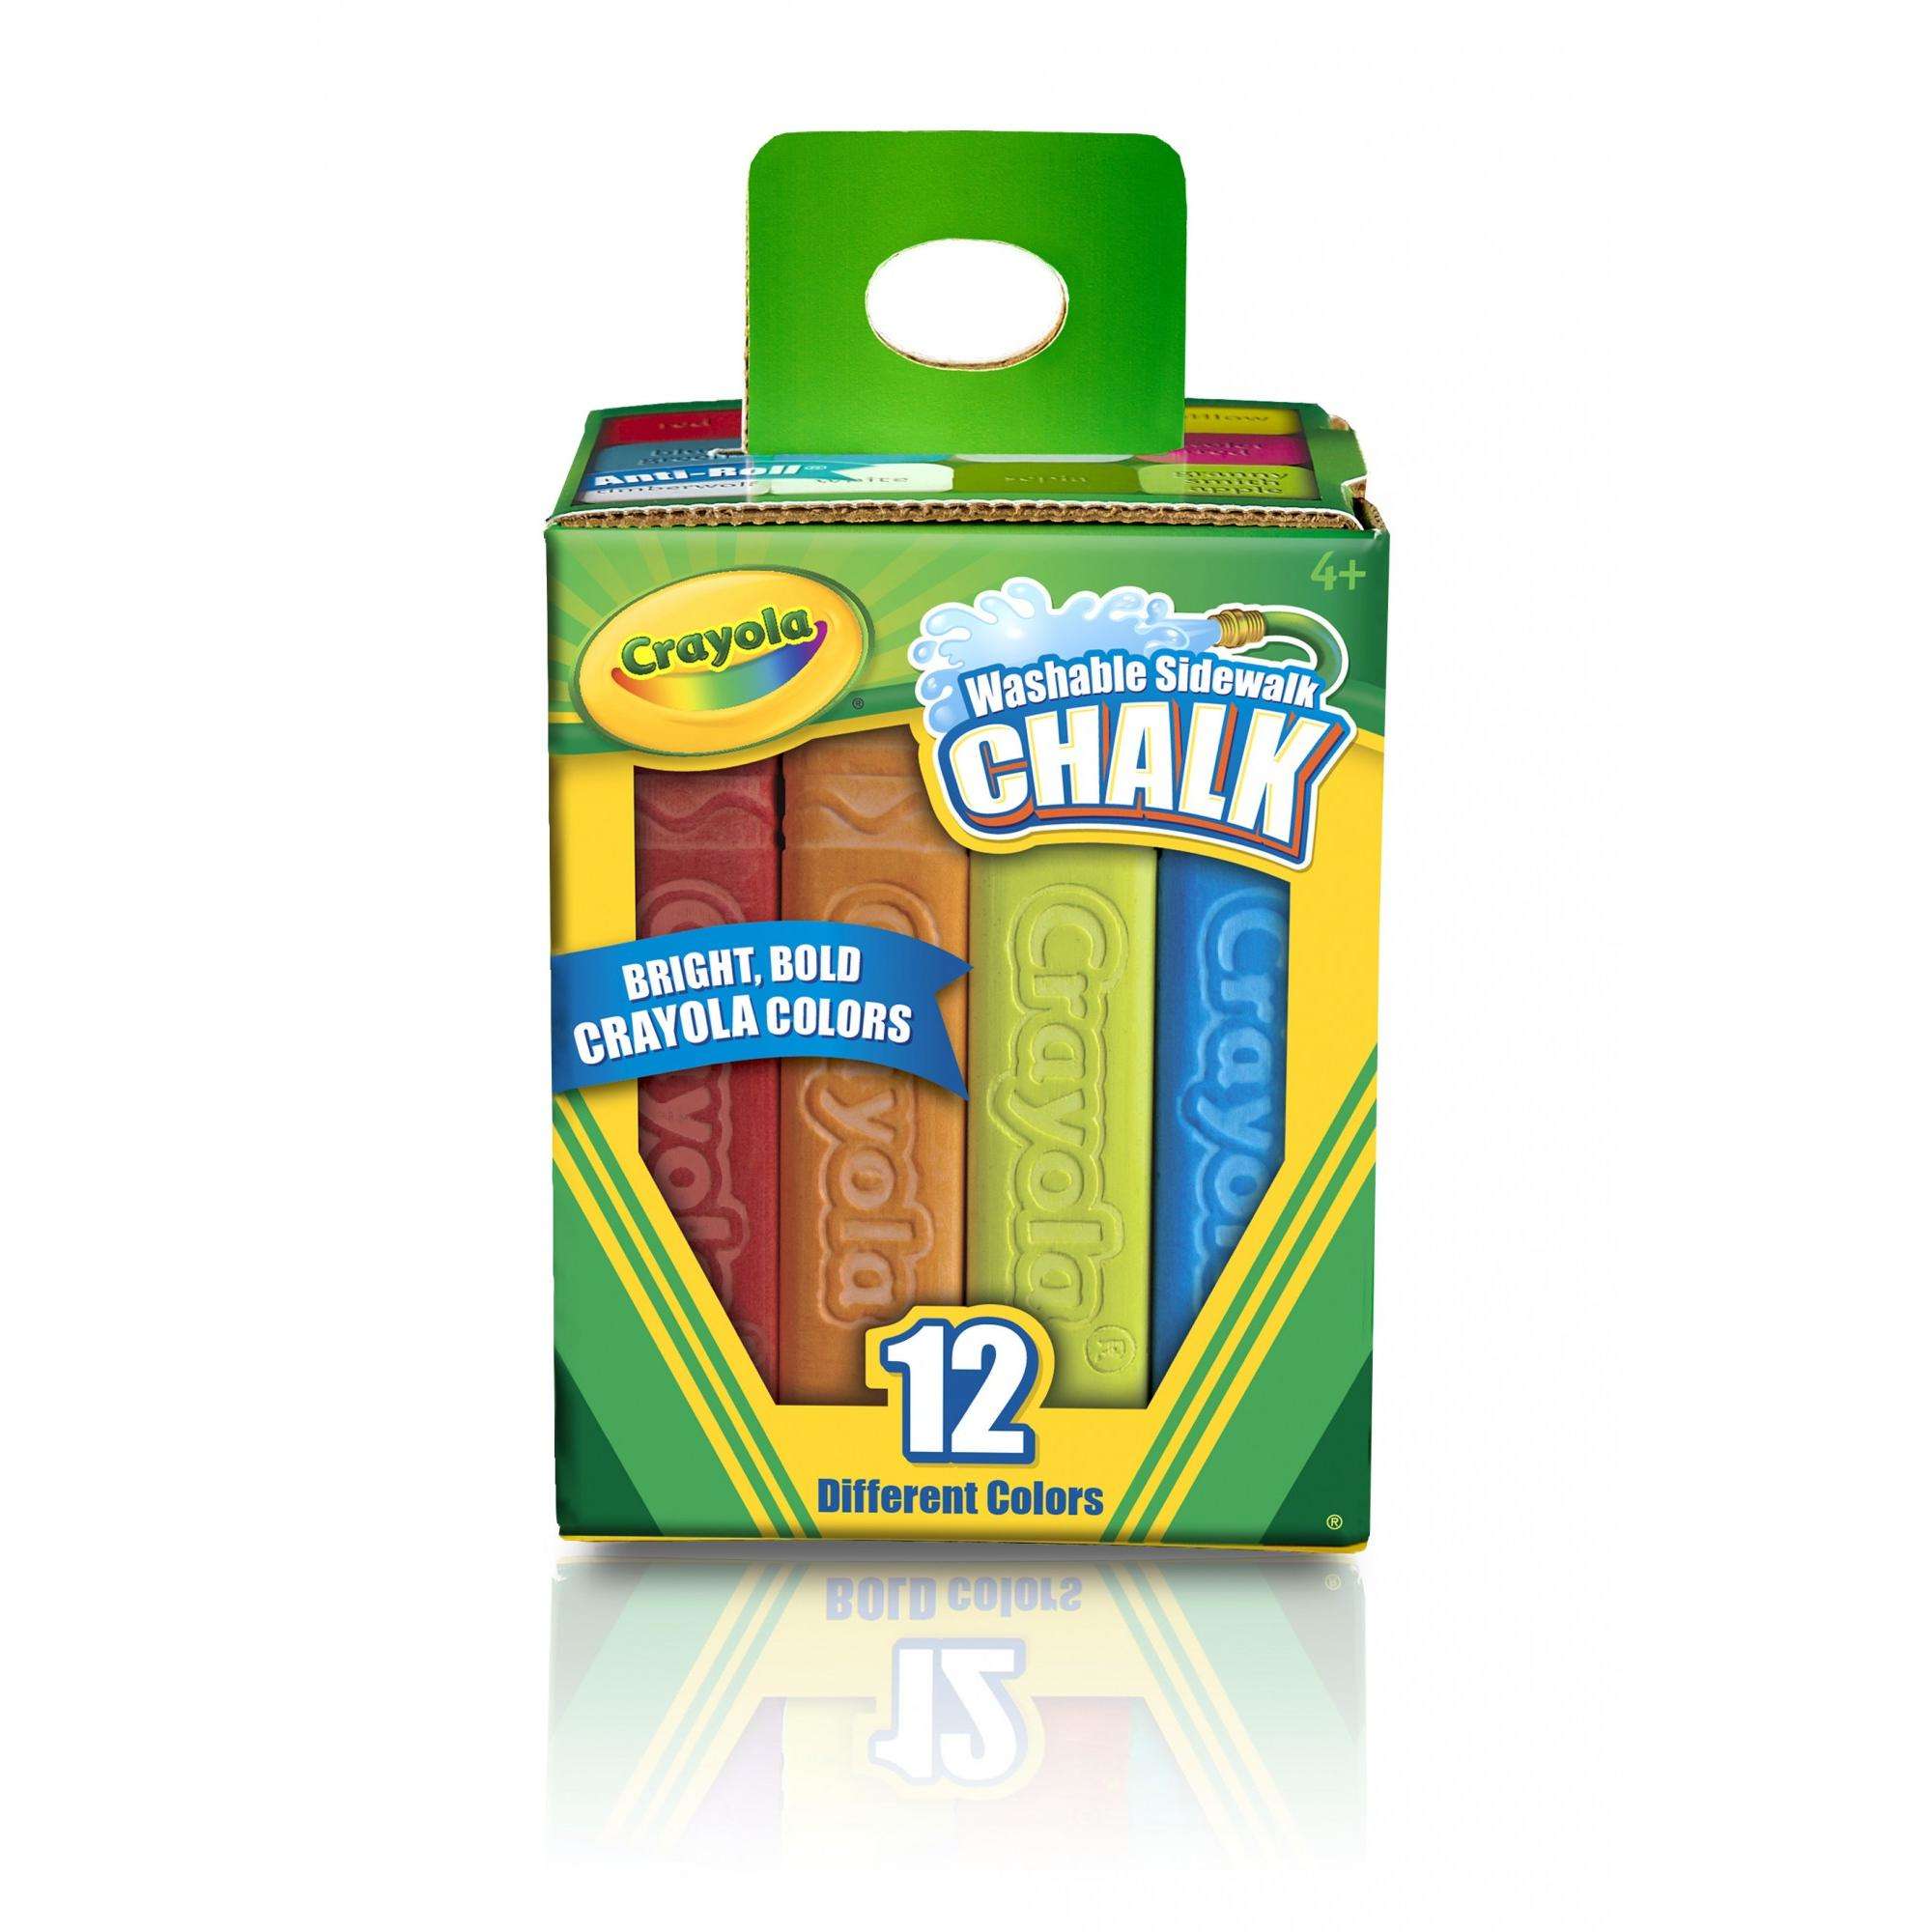 Crayola Outdoor Washable Sidewalk Chalk, 12 Count And Colors - image 1 of 8